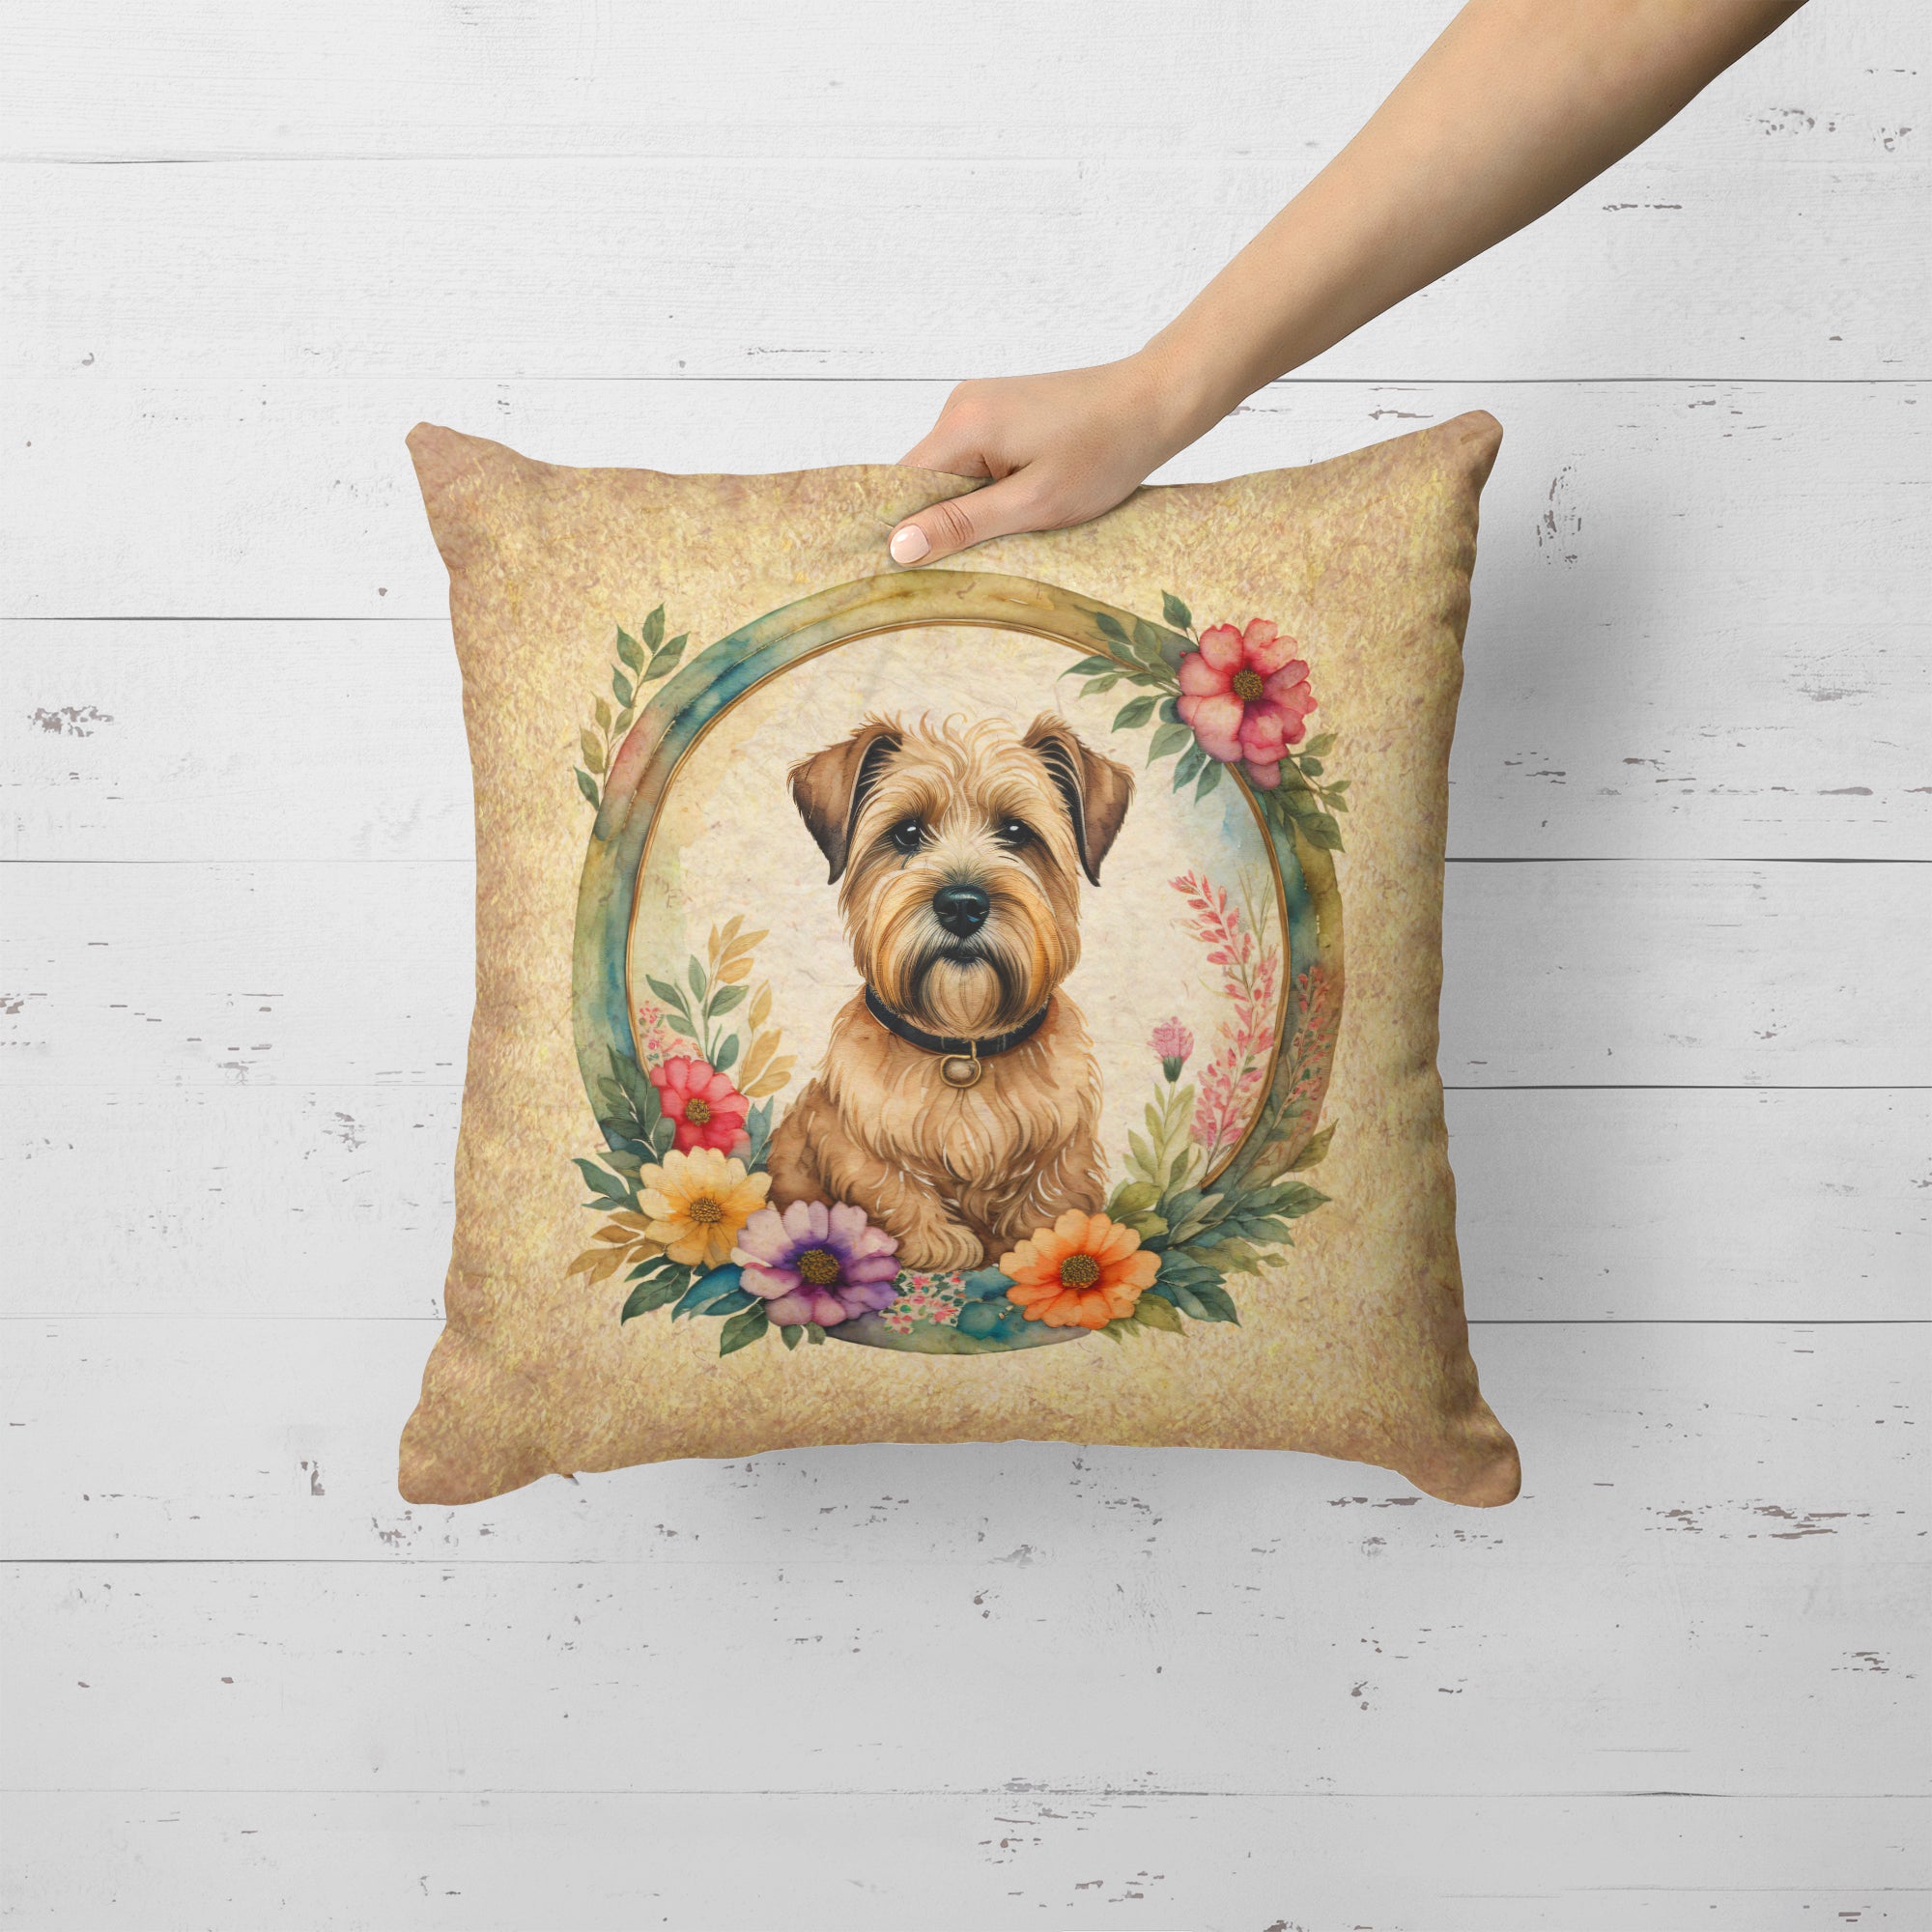 Buy this Wheaten Terrier and Flowers Fabric Decorative Pillow